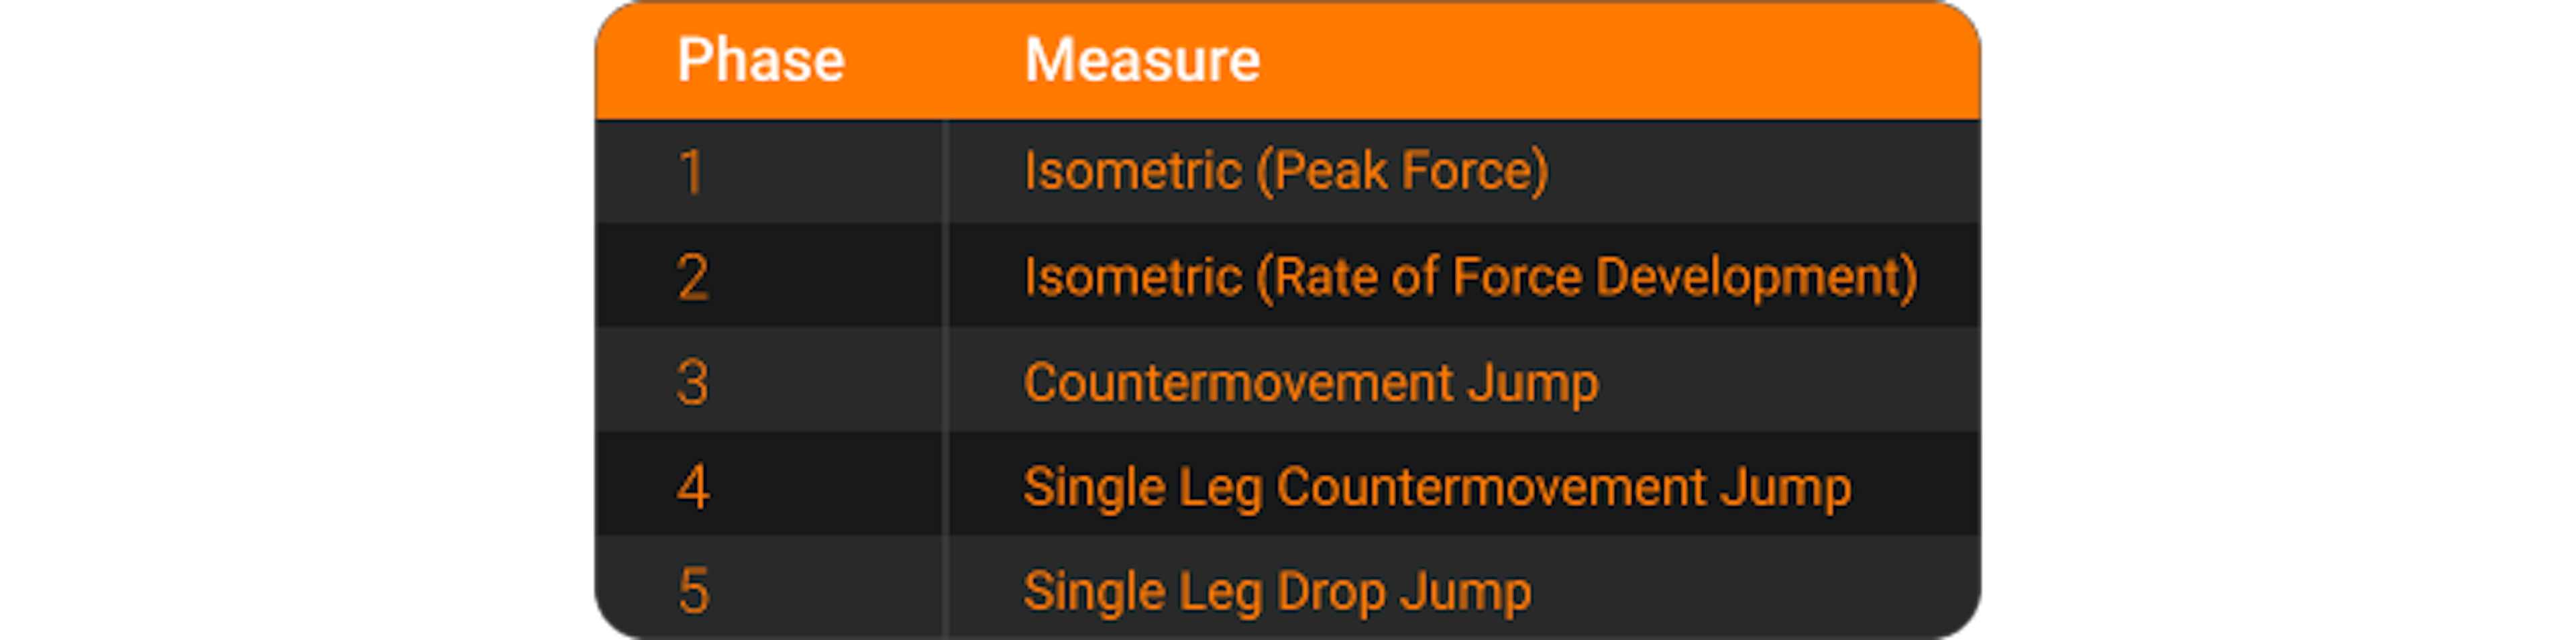 Five key measurements captured using ForceDecks for the Stormers